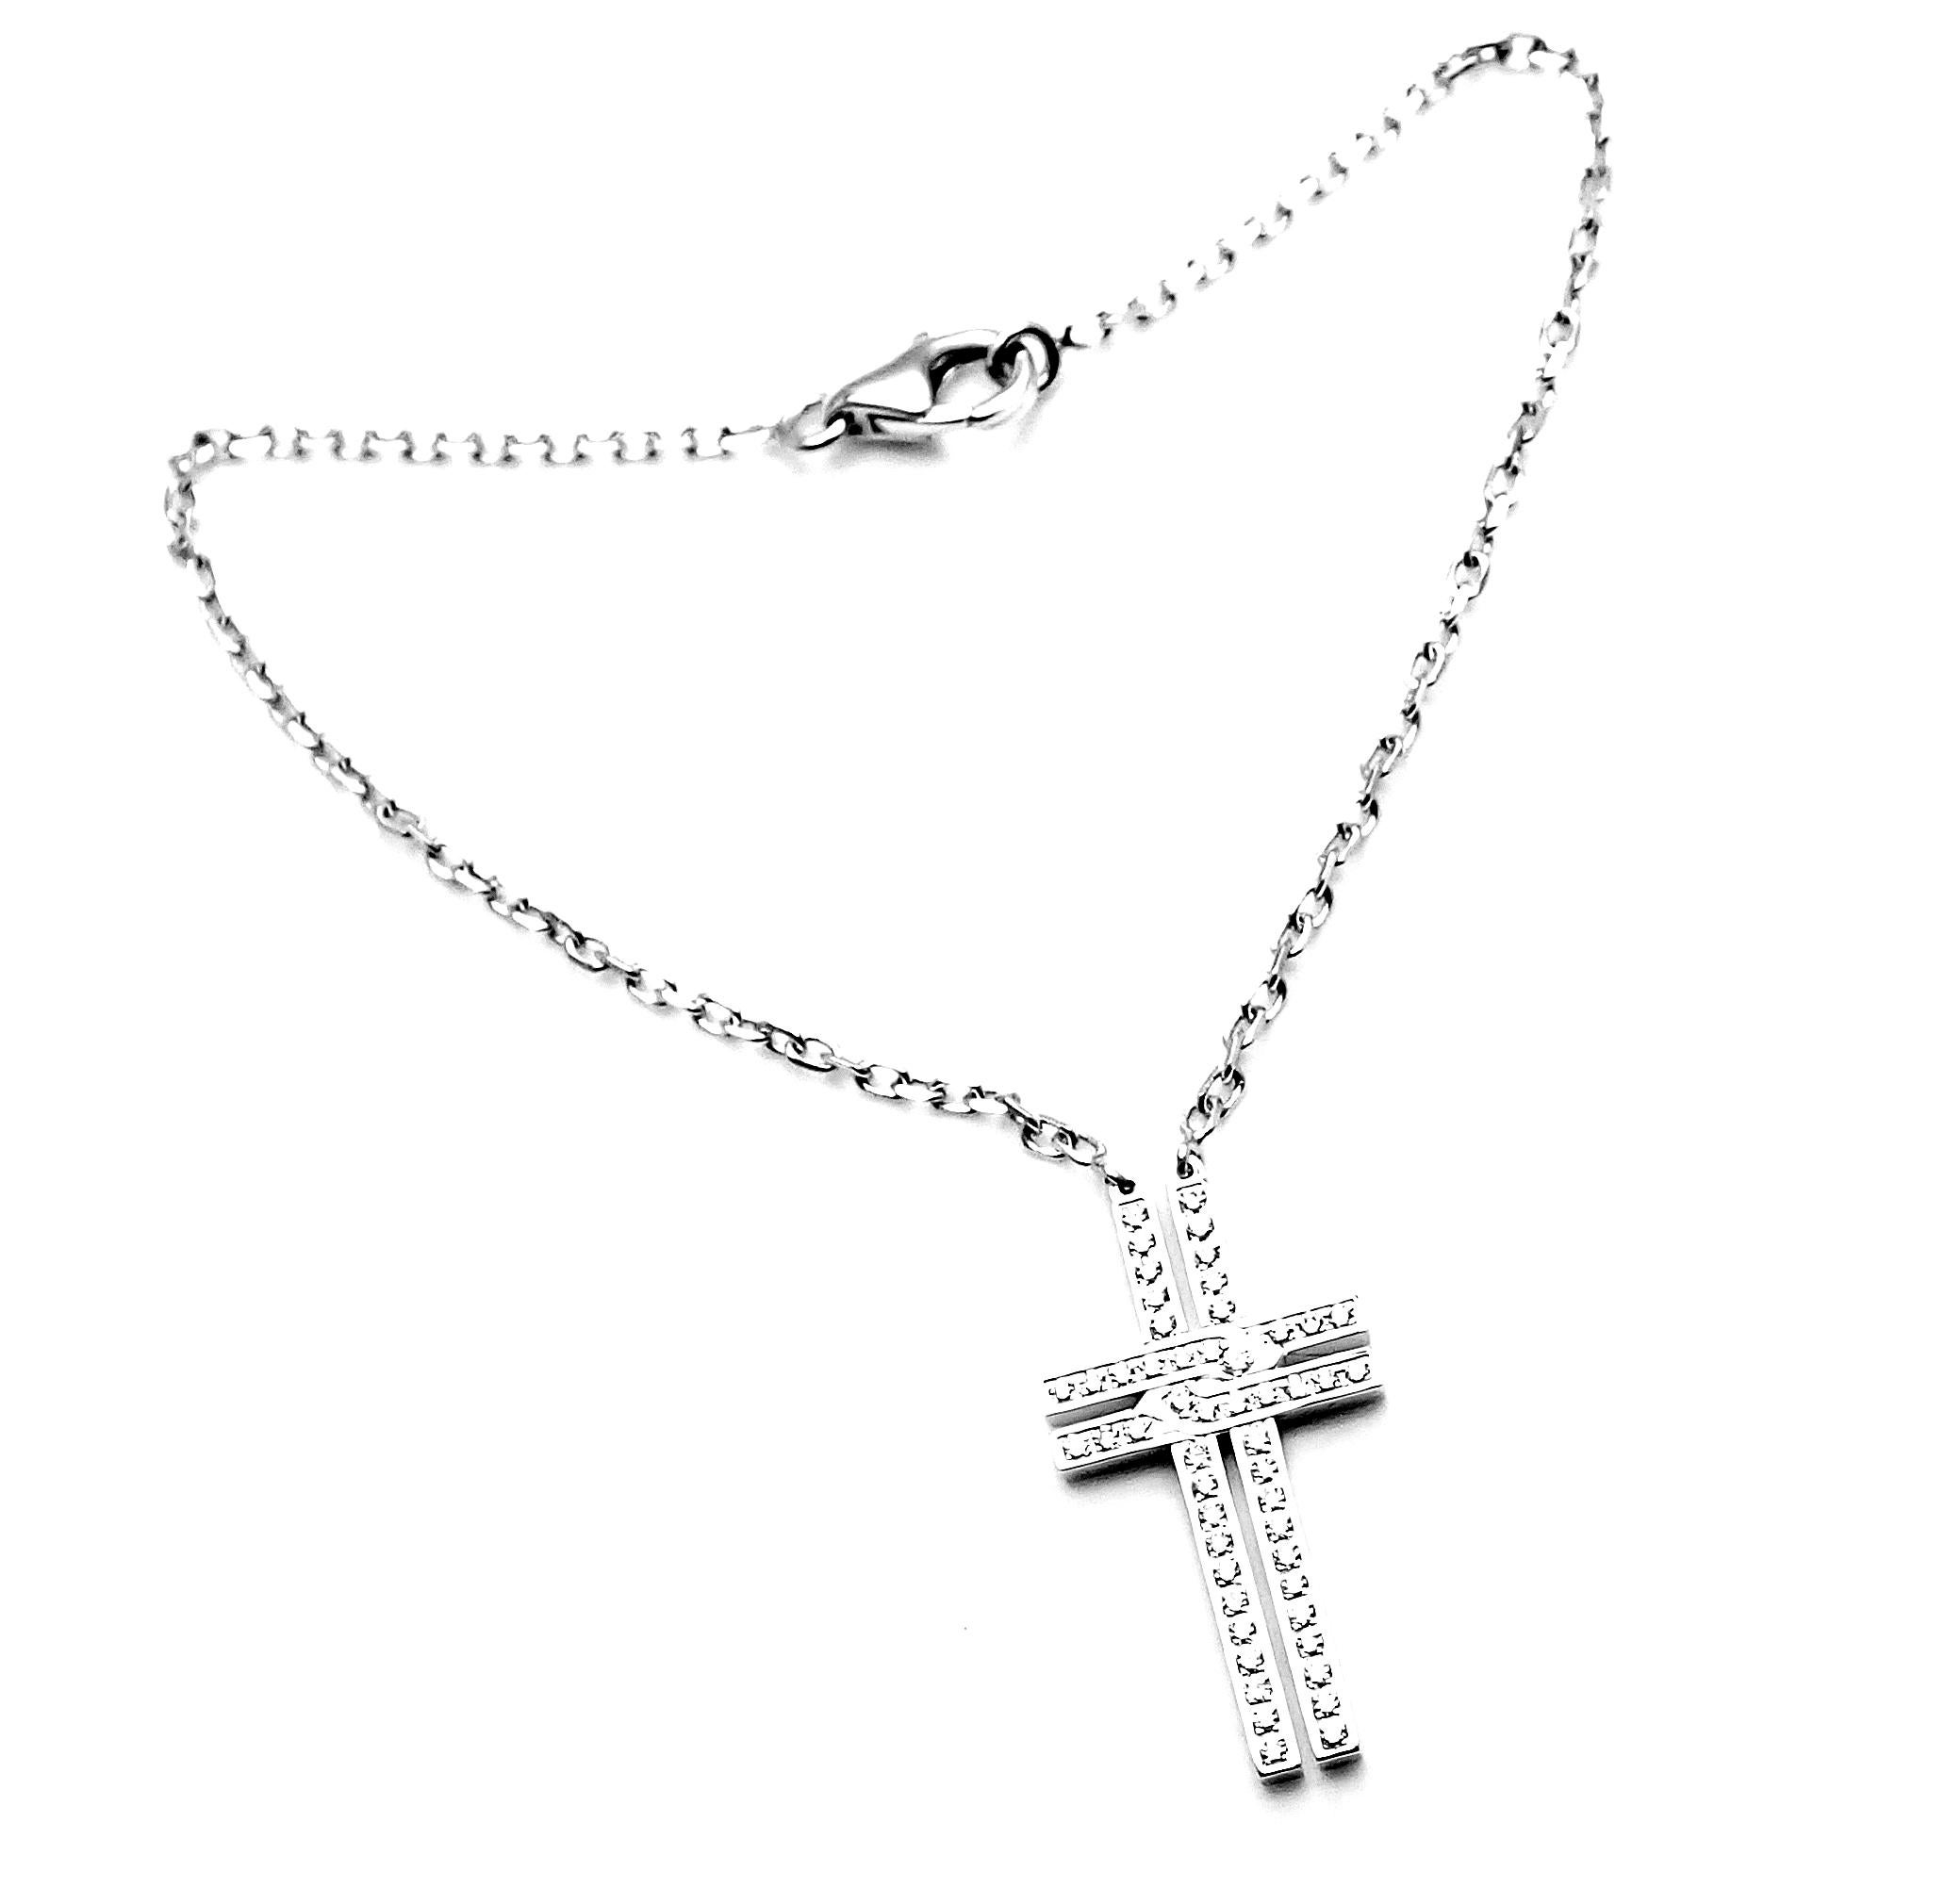 18k White Gold Diamond Cross Charm Link Bracelet by Cartier.
With 52 round brilliant cut diamonds VVS1 clarity, E color total weight approx. .26ctw
This bracelet comes with Cartier certificate.
Details:
Length: 7